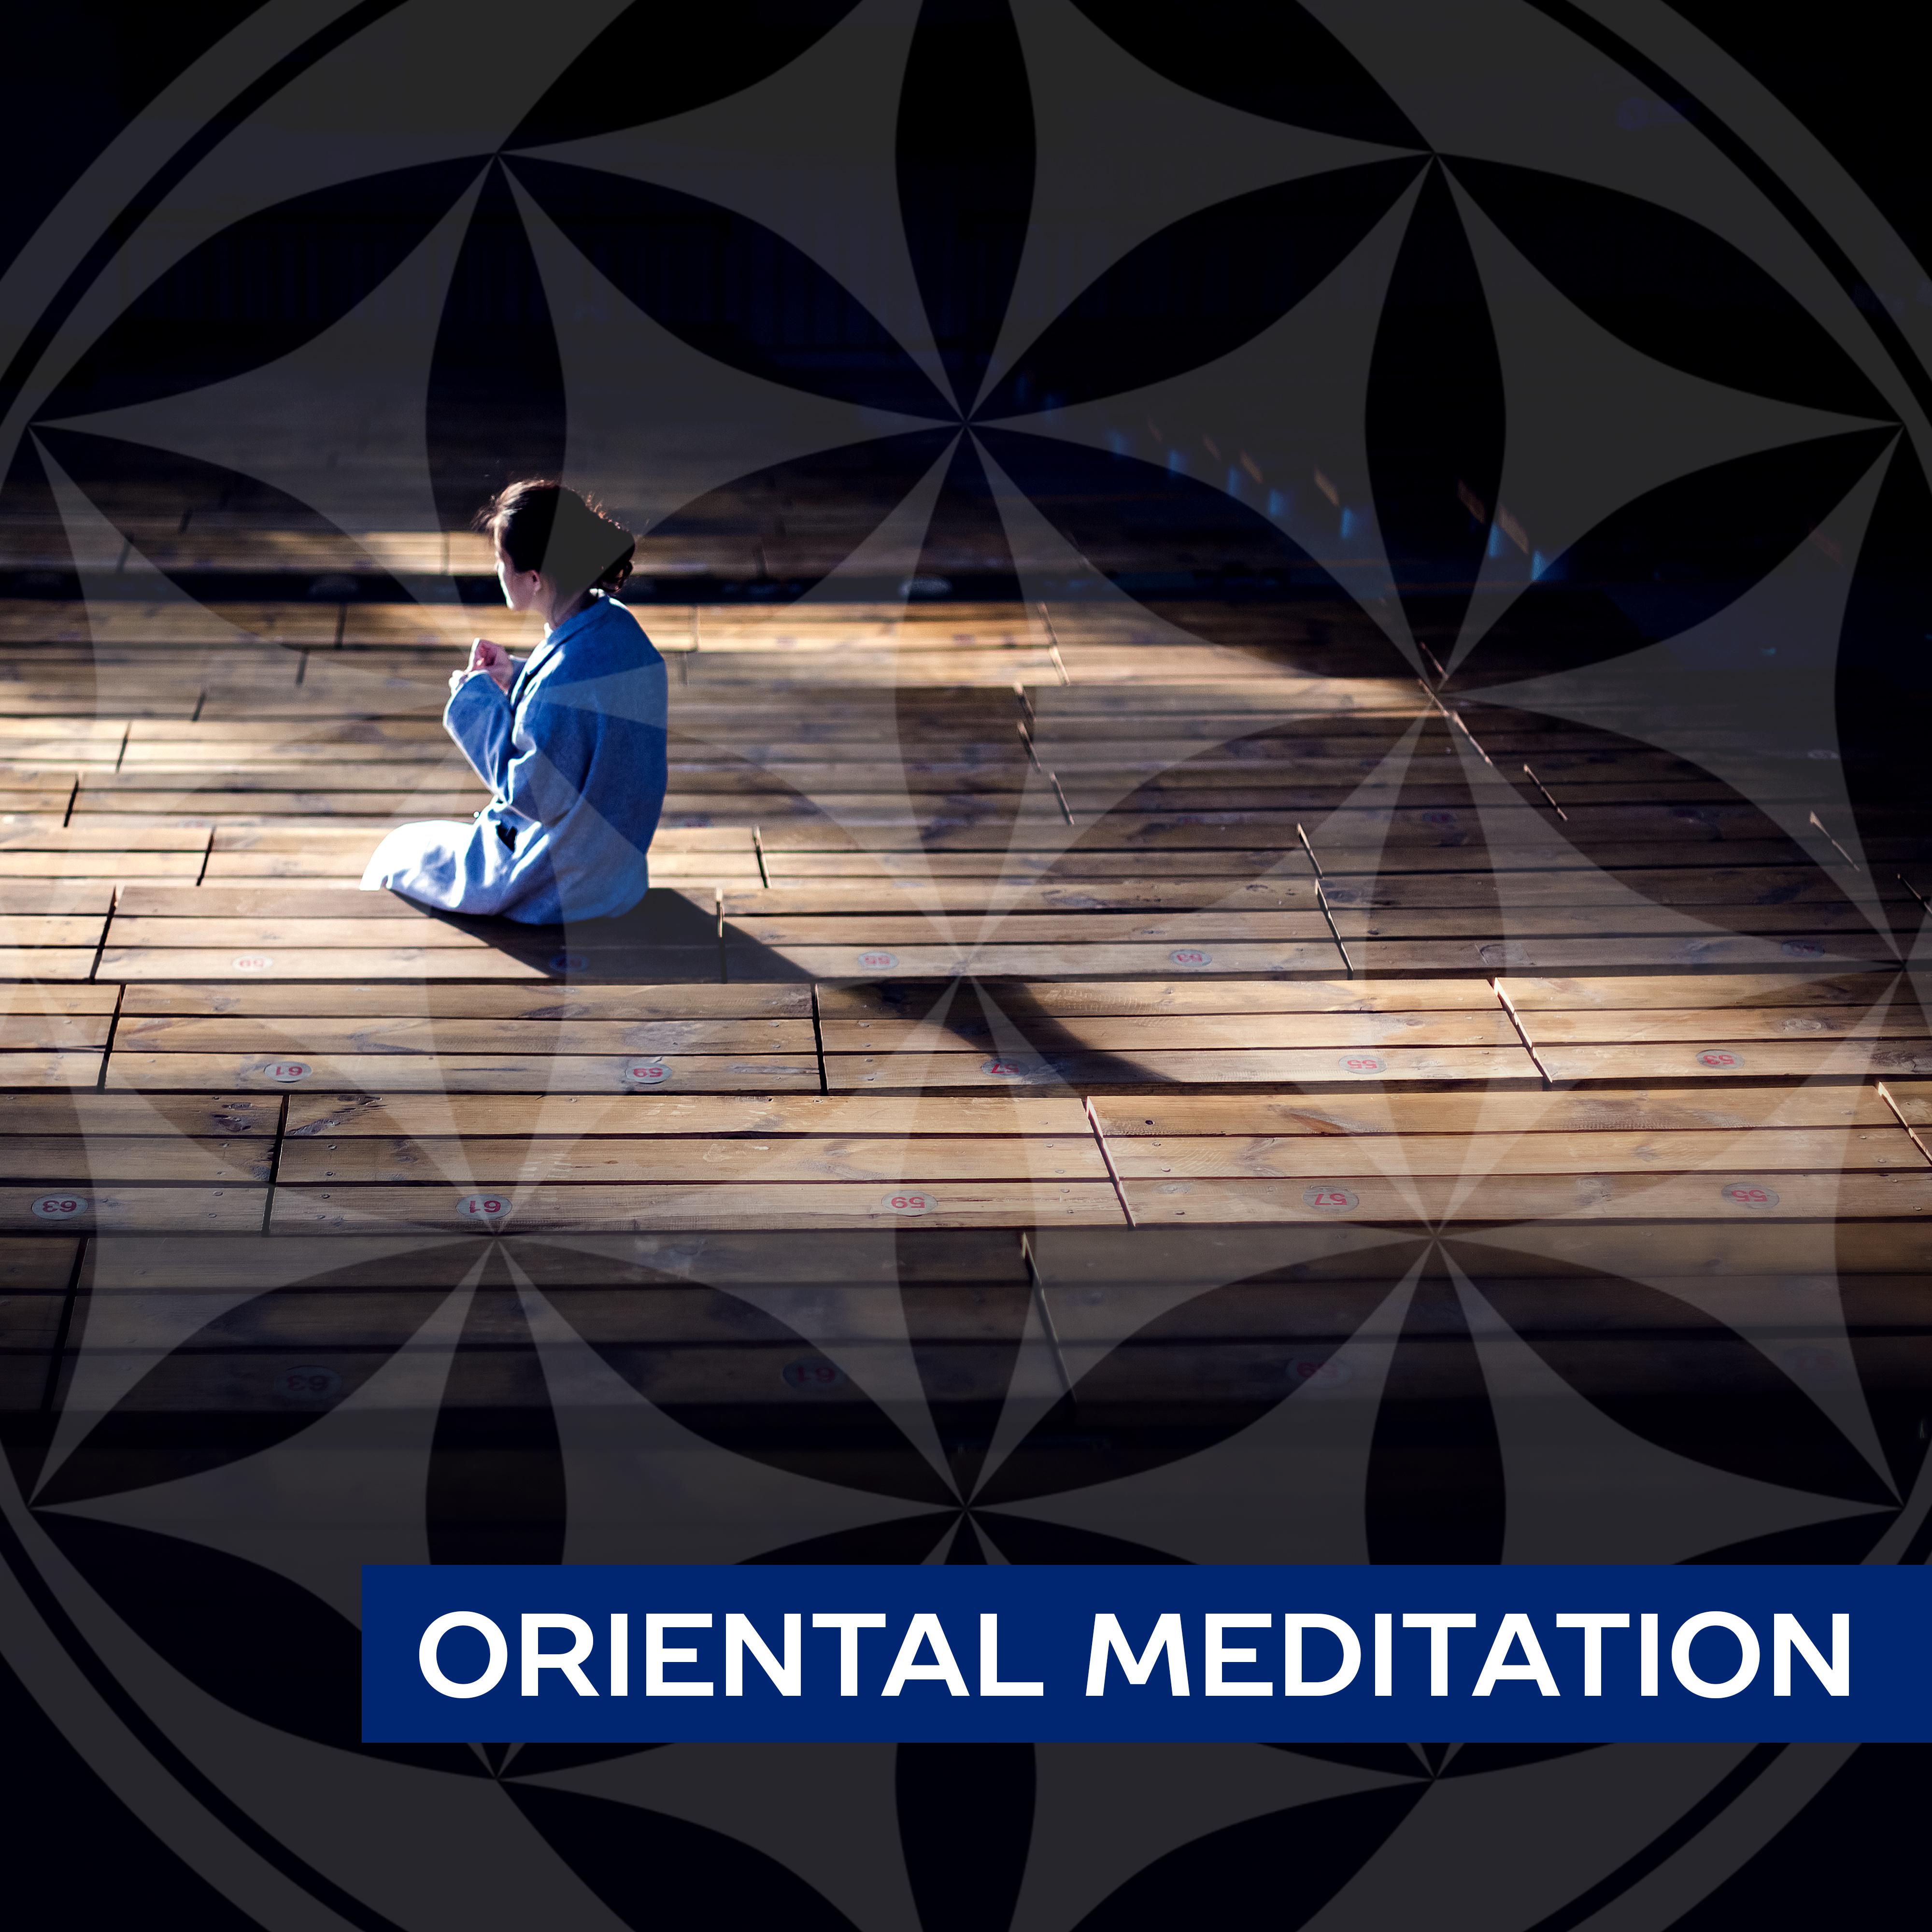 Oriental Meditation – Contemplation of Nature, Focus, Zen, Sounds of Yoga, Harmony, Better Concentration, Clear Mind